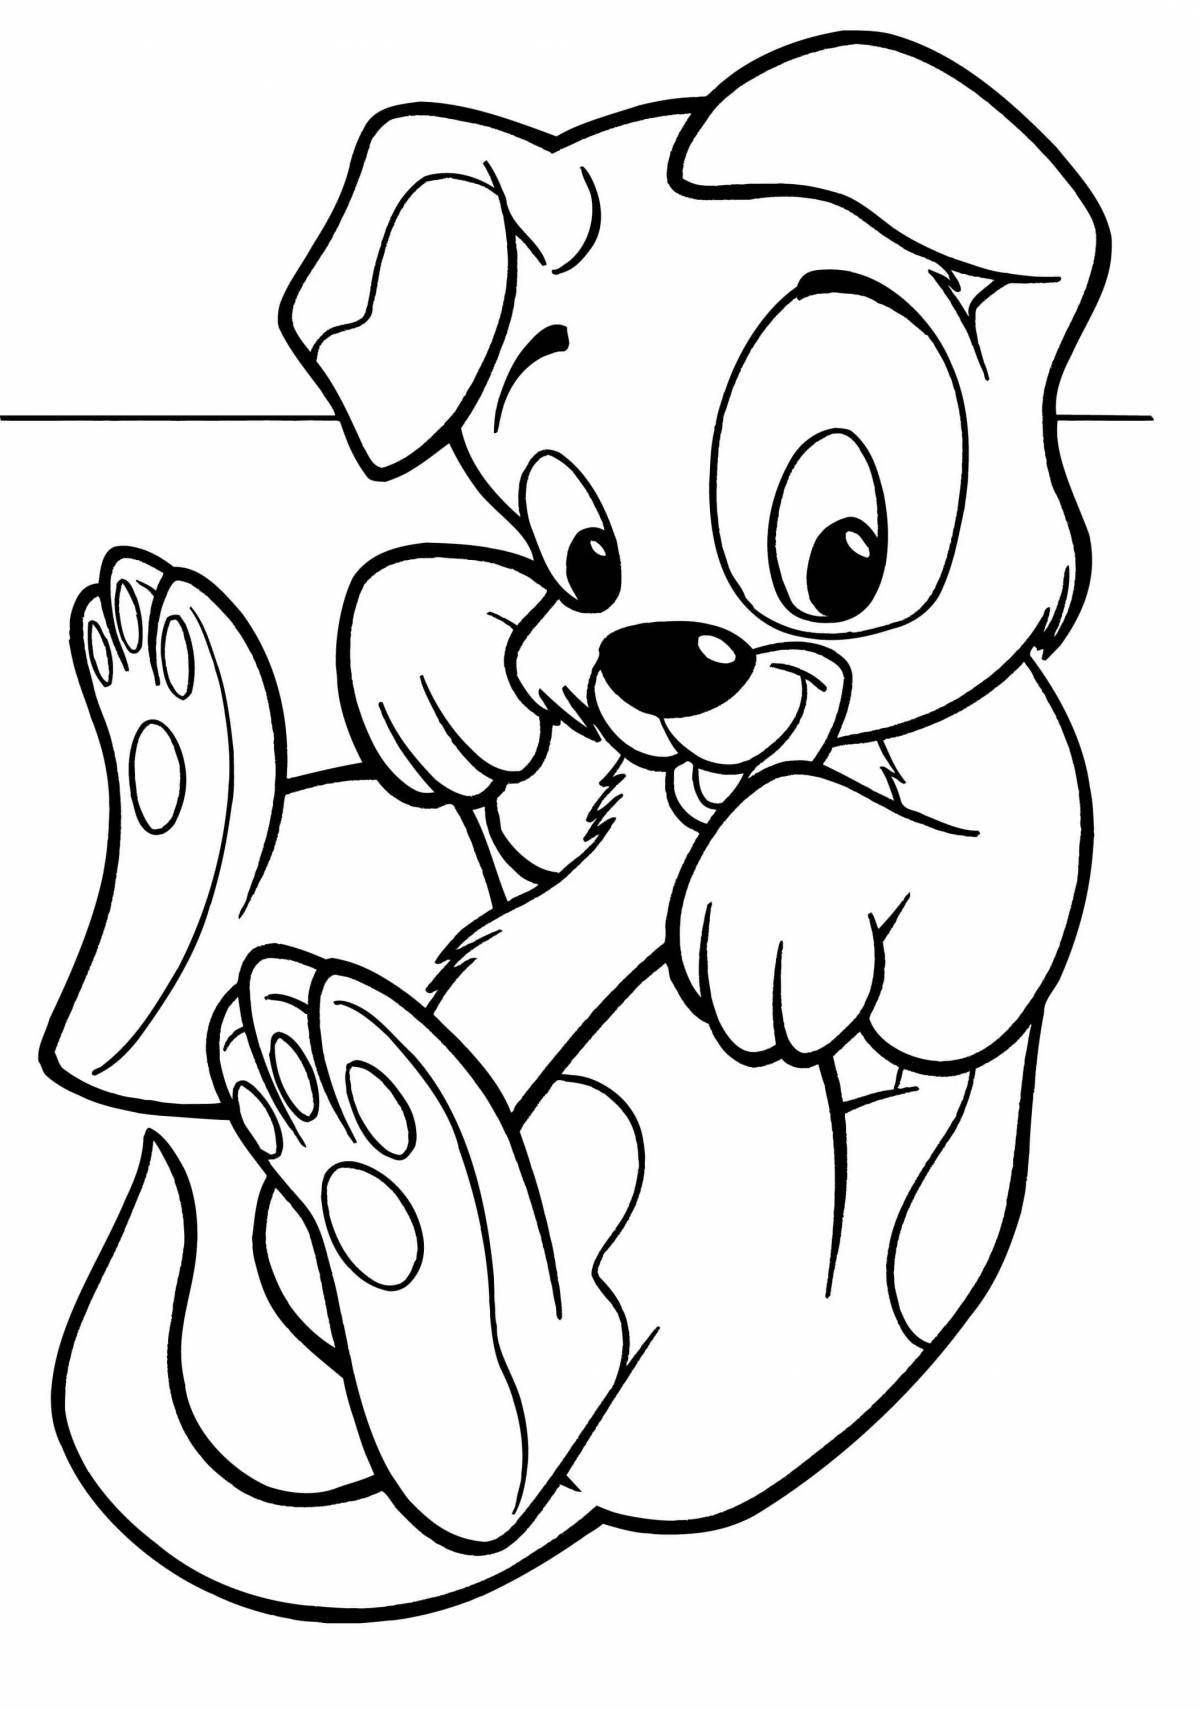 Coloring page adorable dog